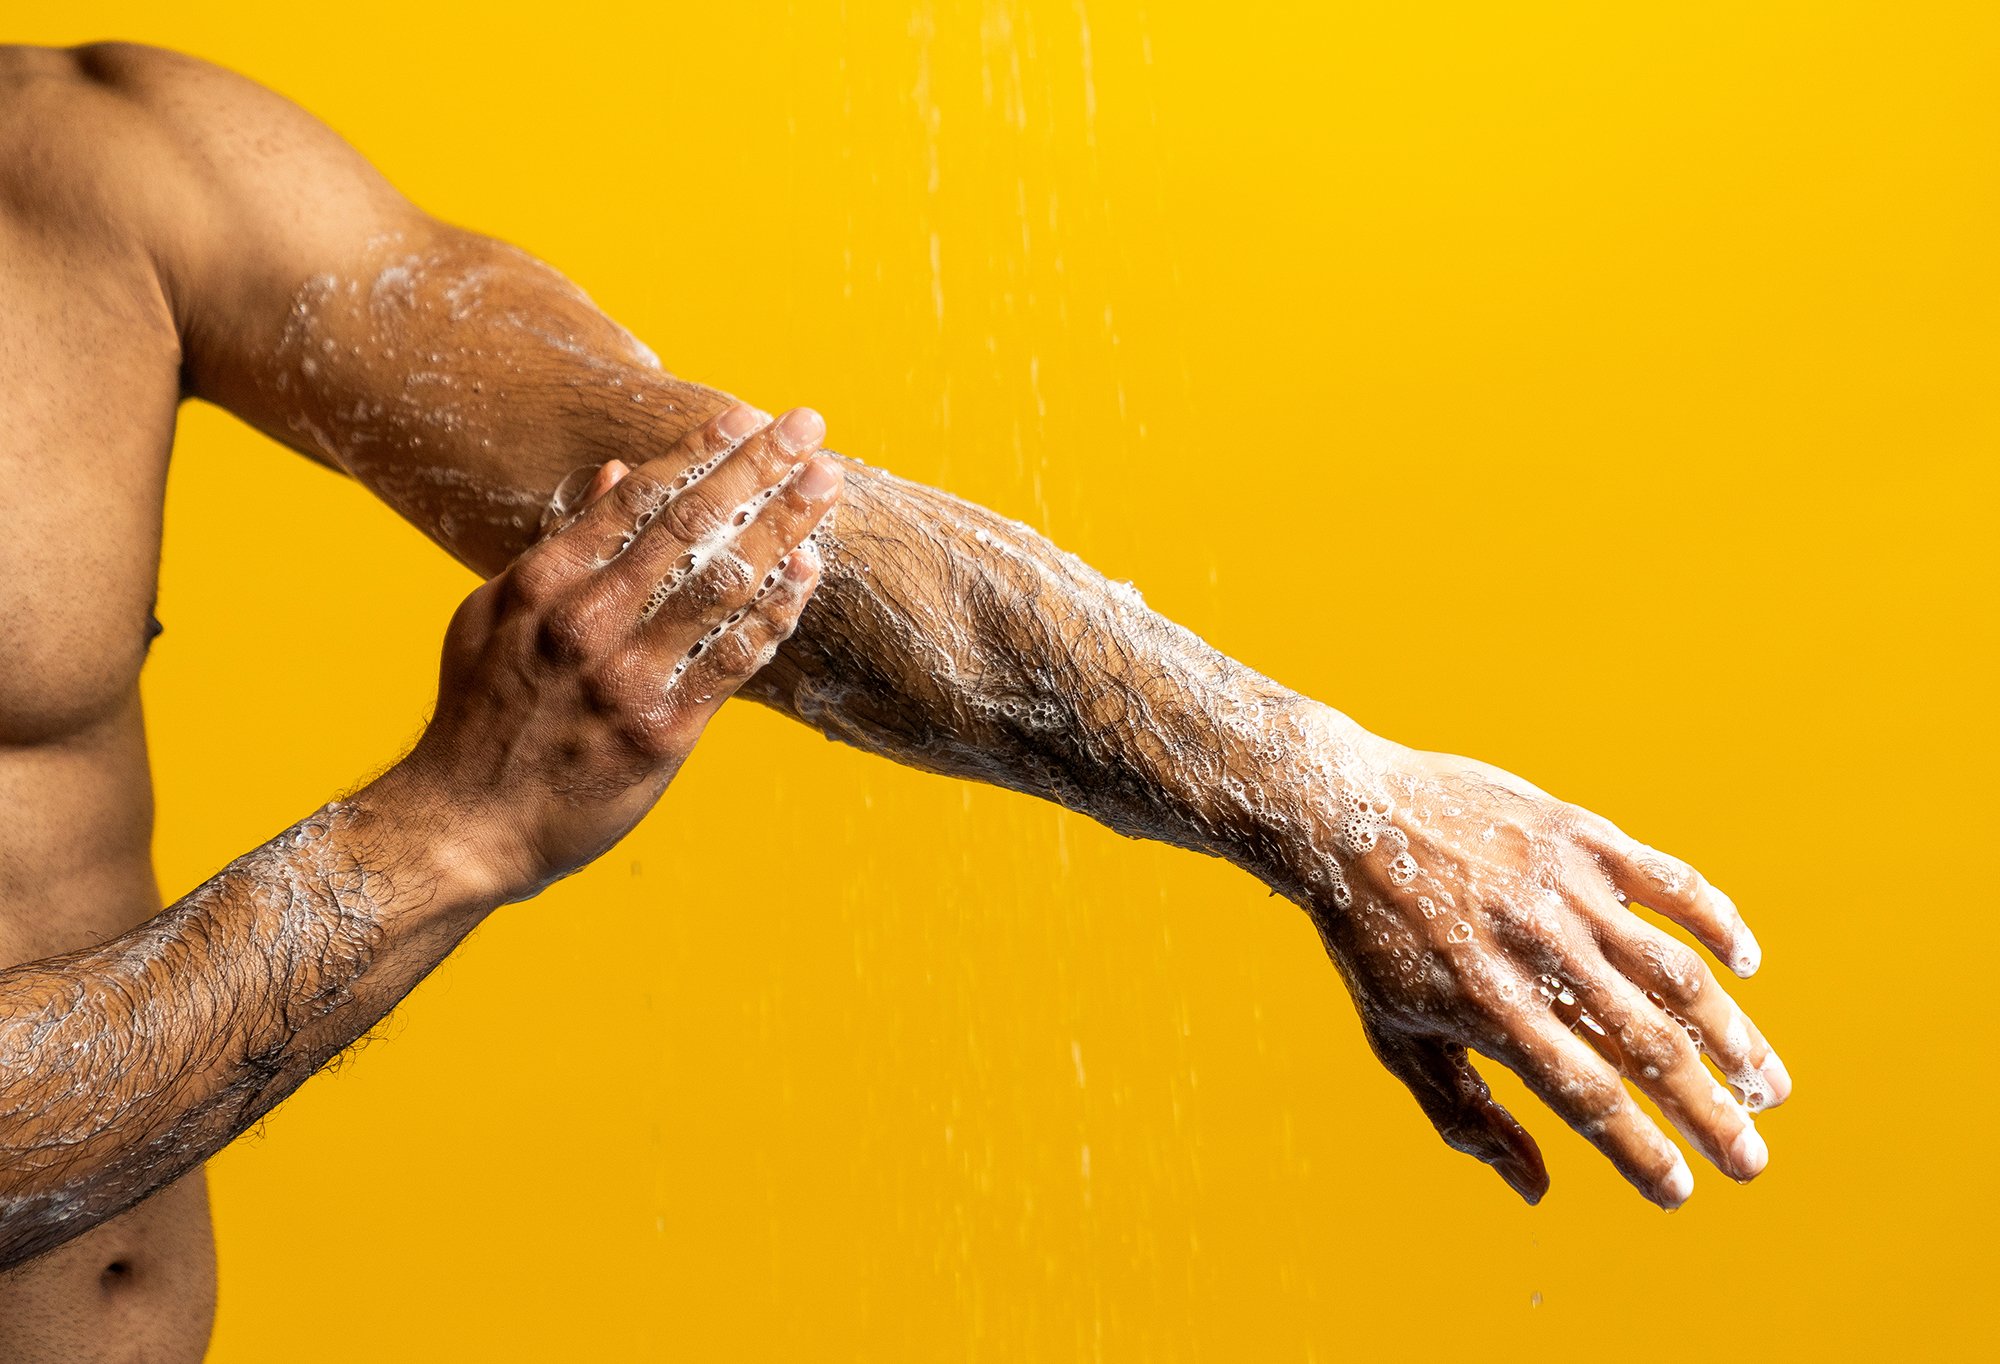 Sticky Dates Shower Gel being lathered onto a models arm in front of a yellow background.